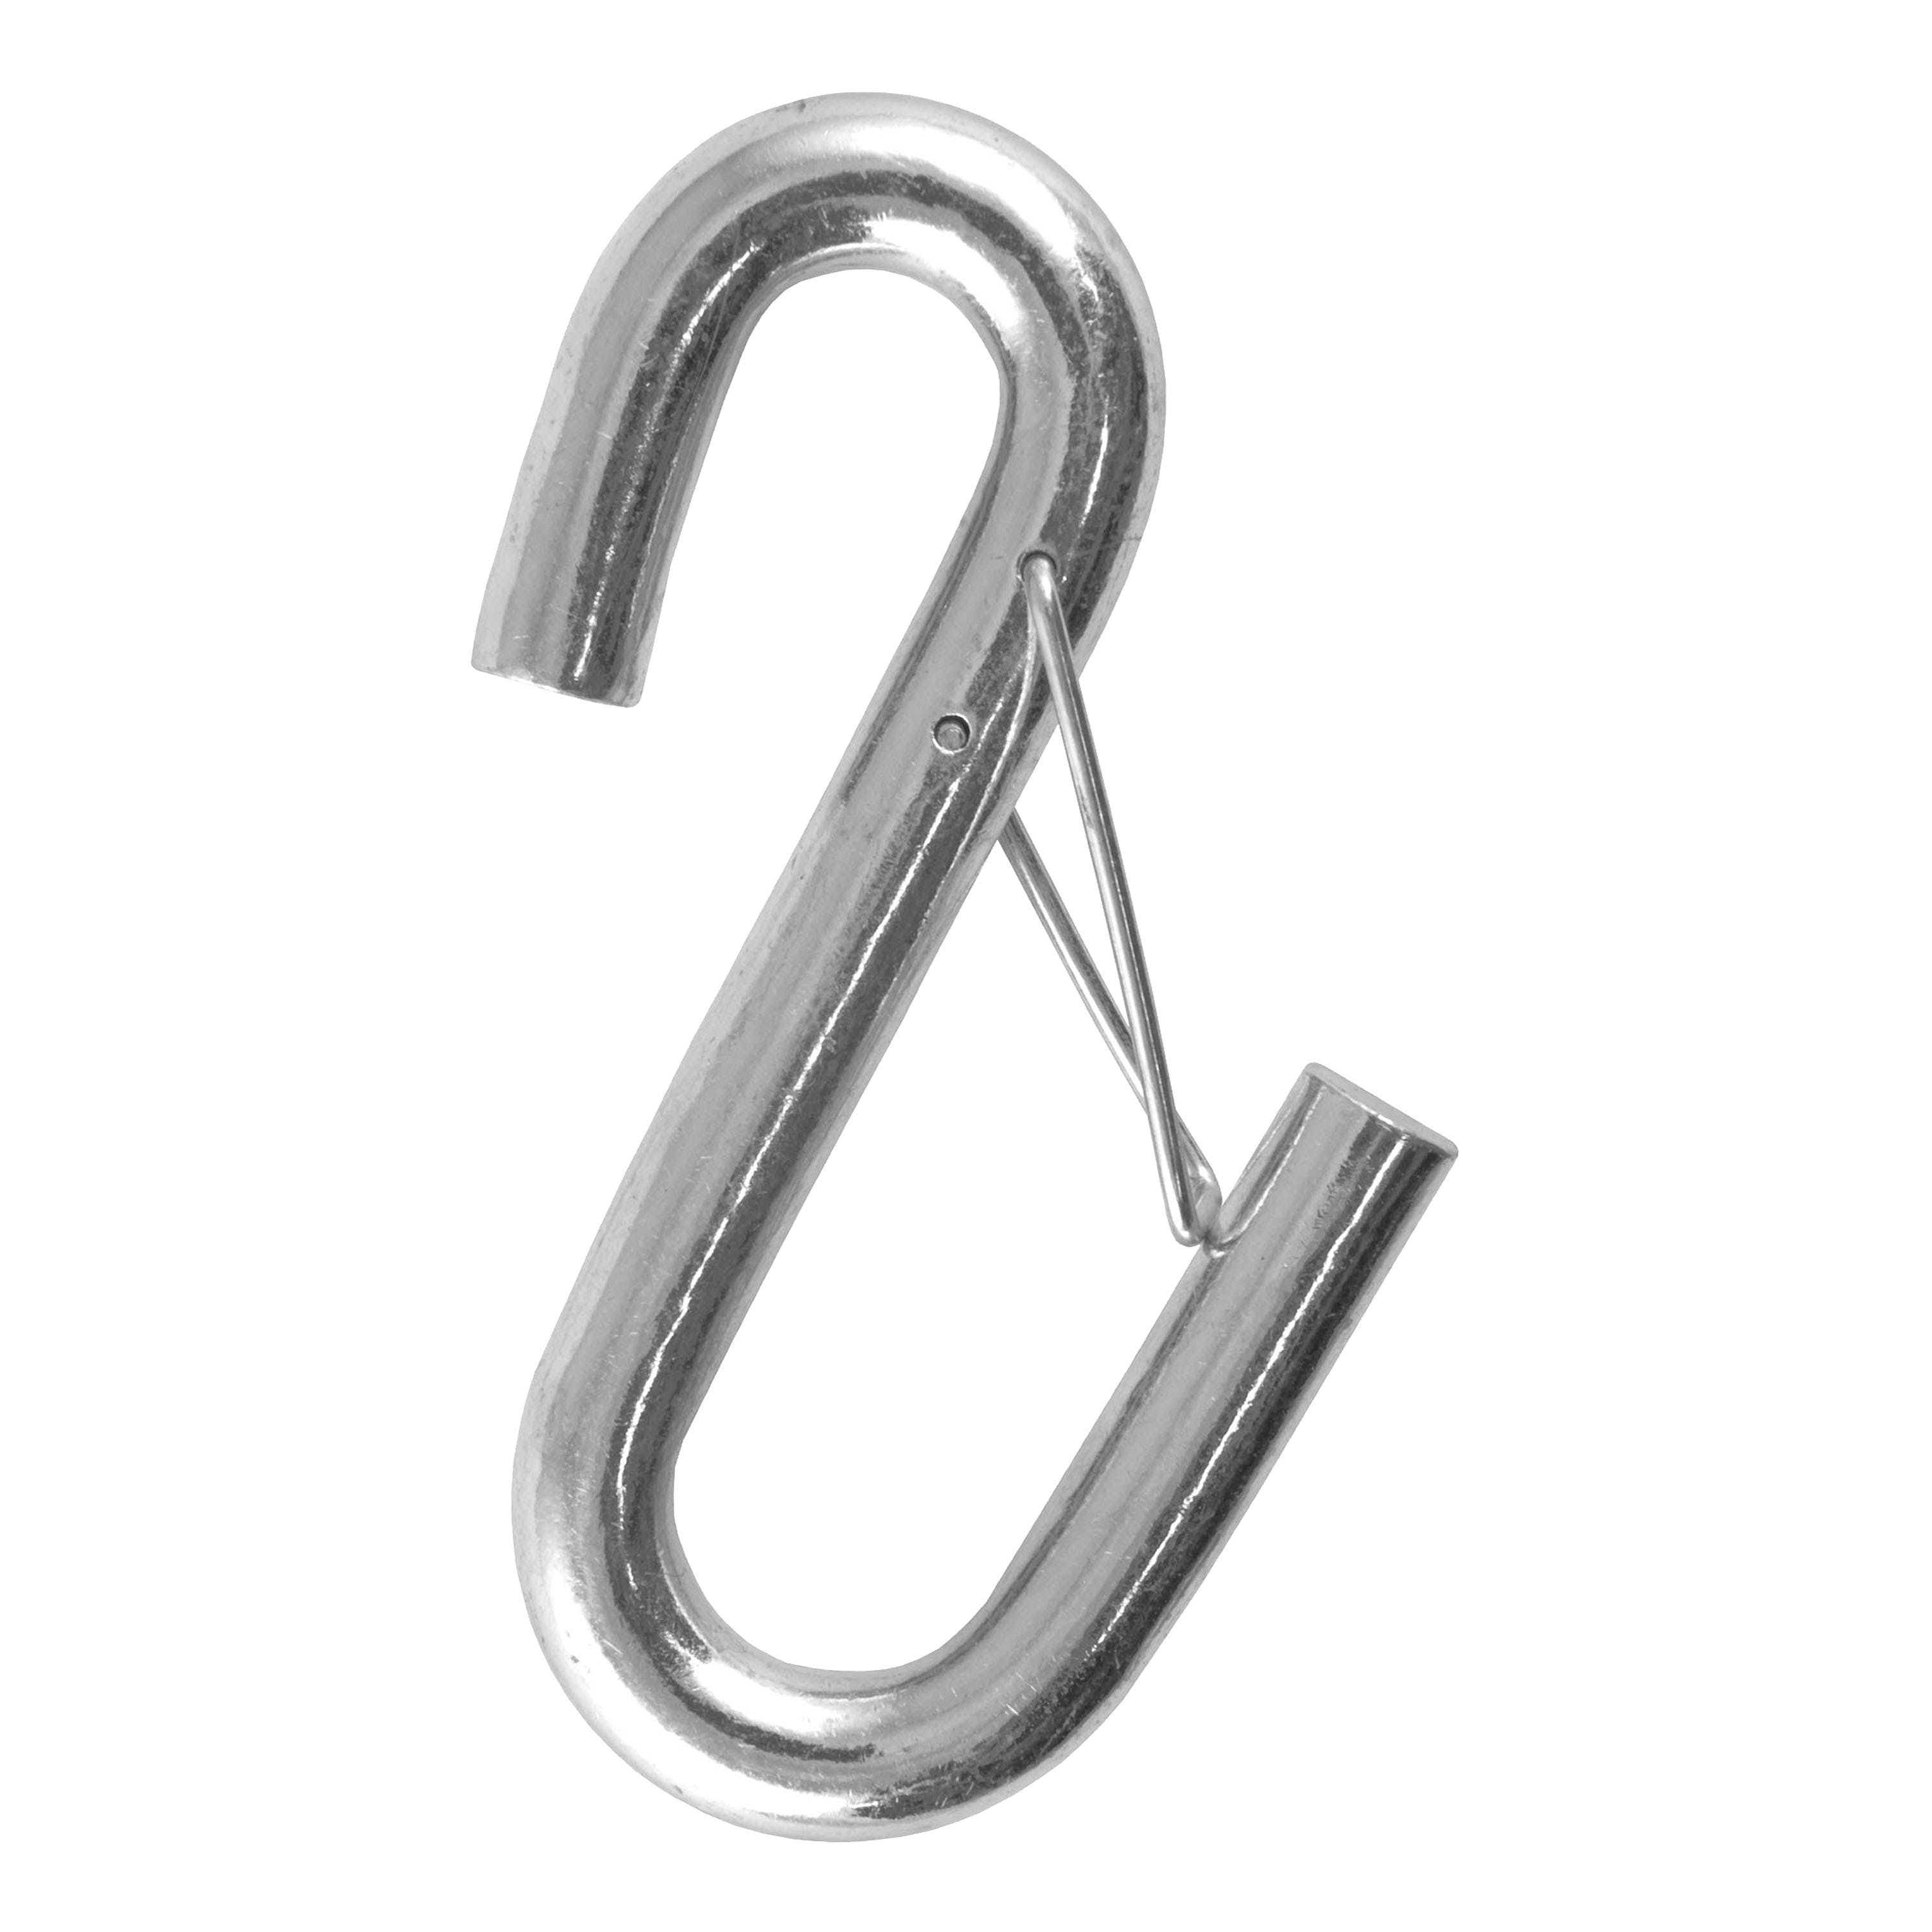 CURT 81810 Certified 3/8 Safety Latch S-Hook (2,000 lbs.)